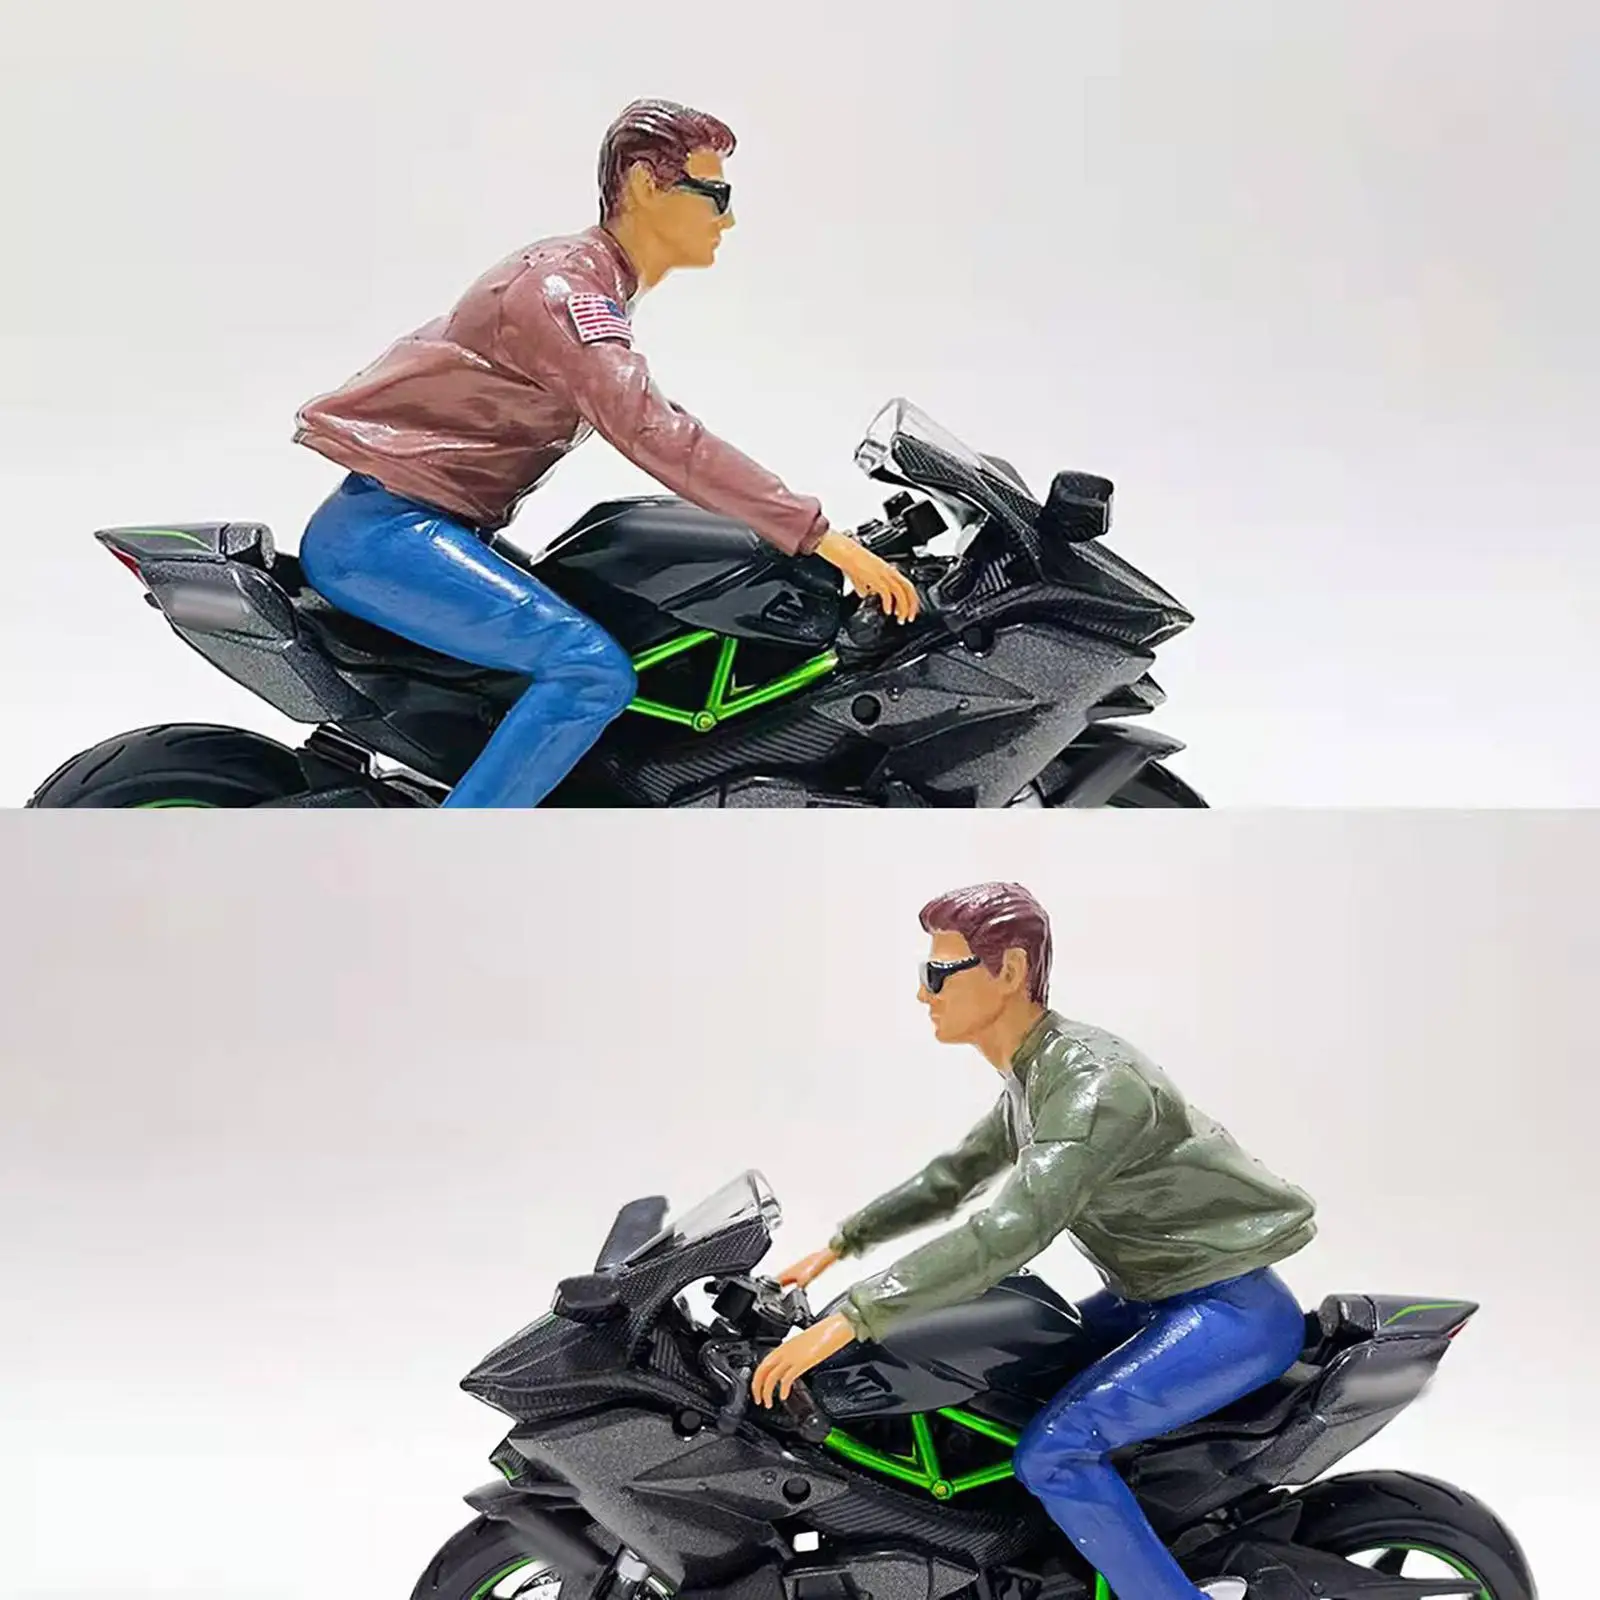 Miniature People Model Ride Motorcycle Doll 1/18 Character Model Toys for Match Motorcycle Model